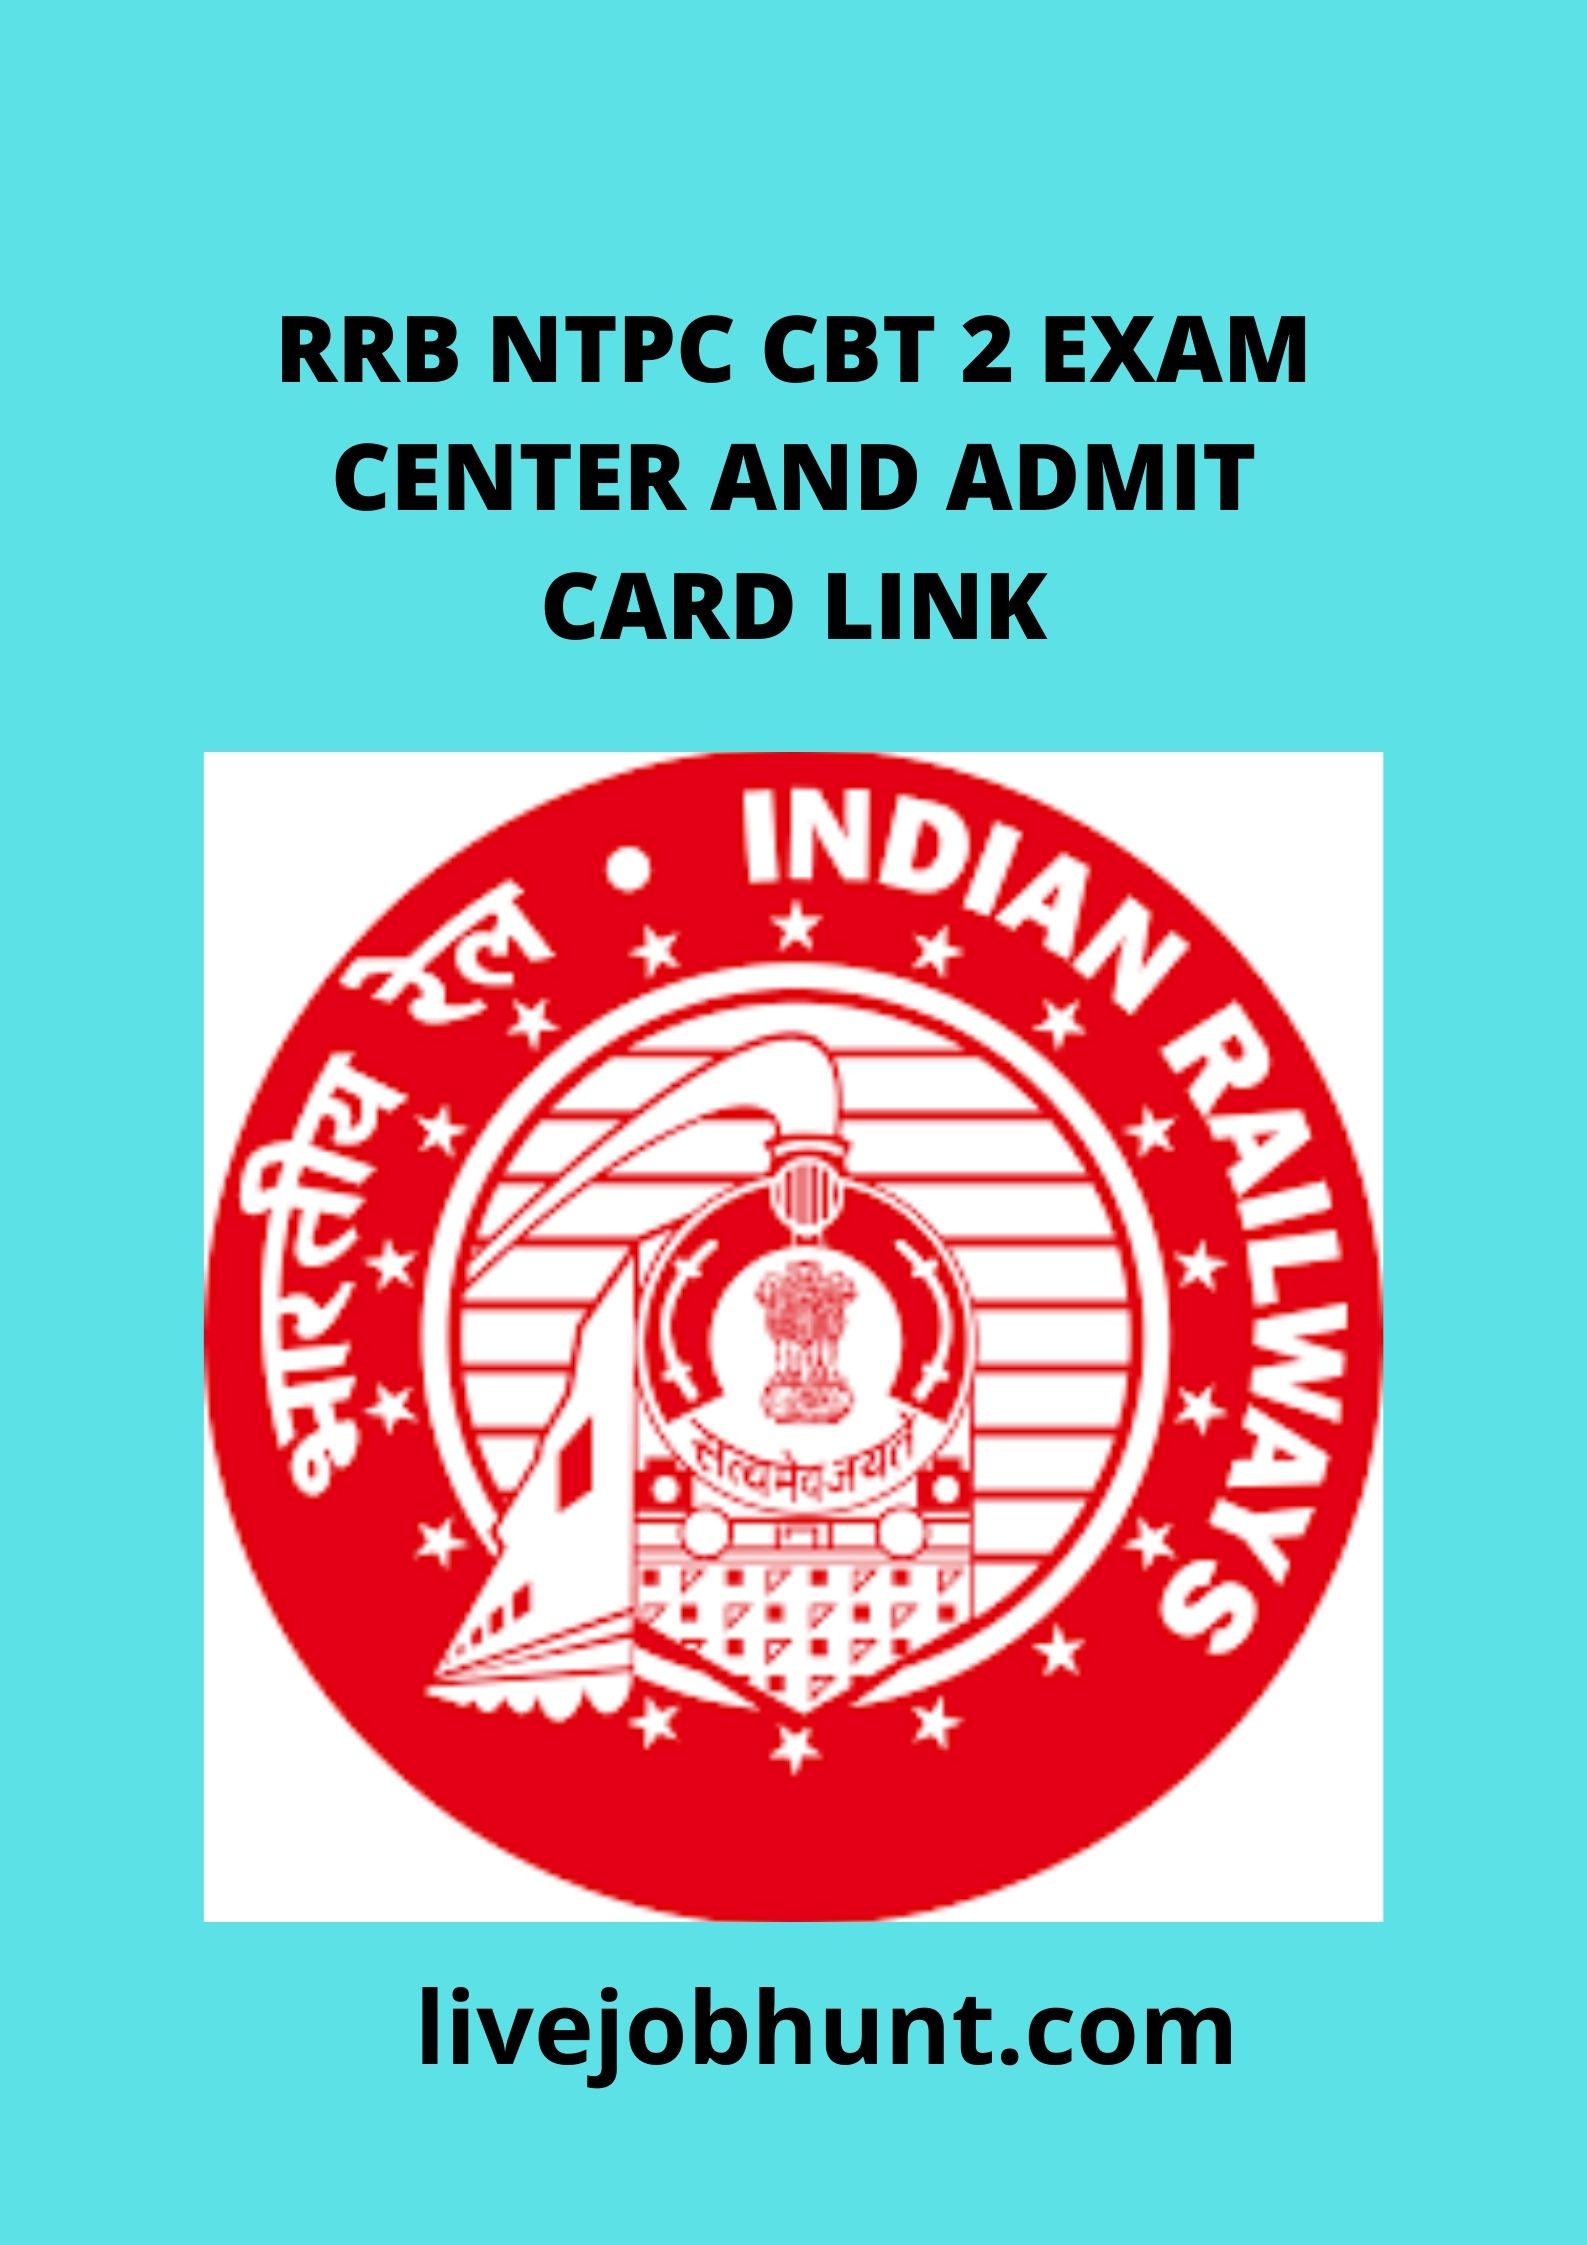 RRB NTPC CBT 2 EXAM CENTER AND ADMIT CARD LINK